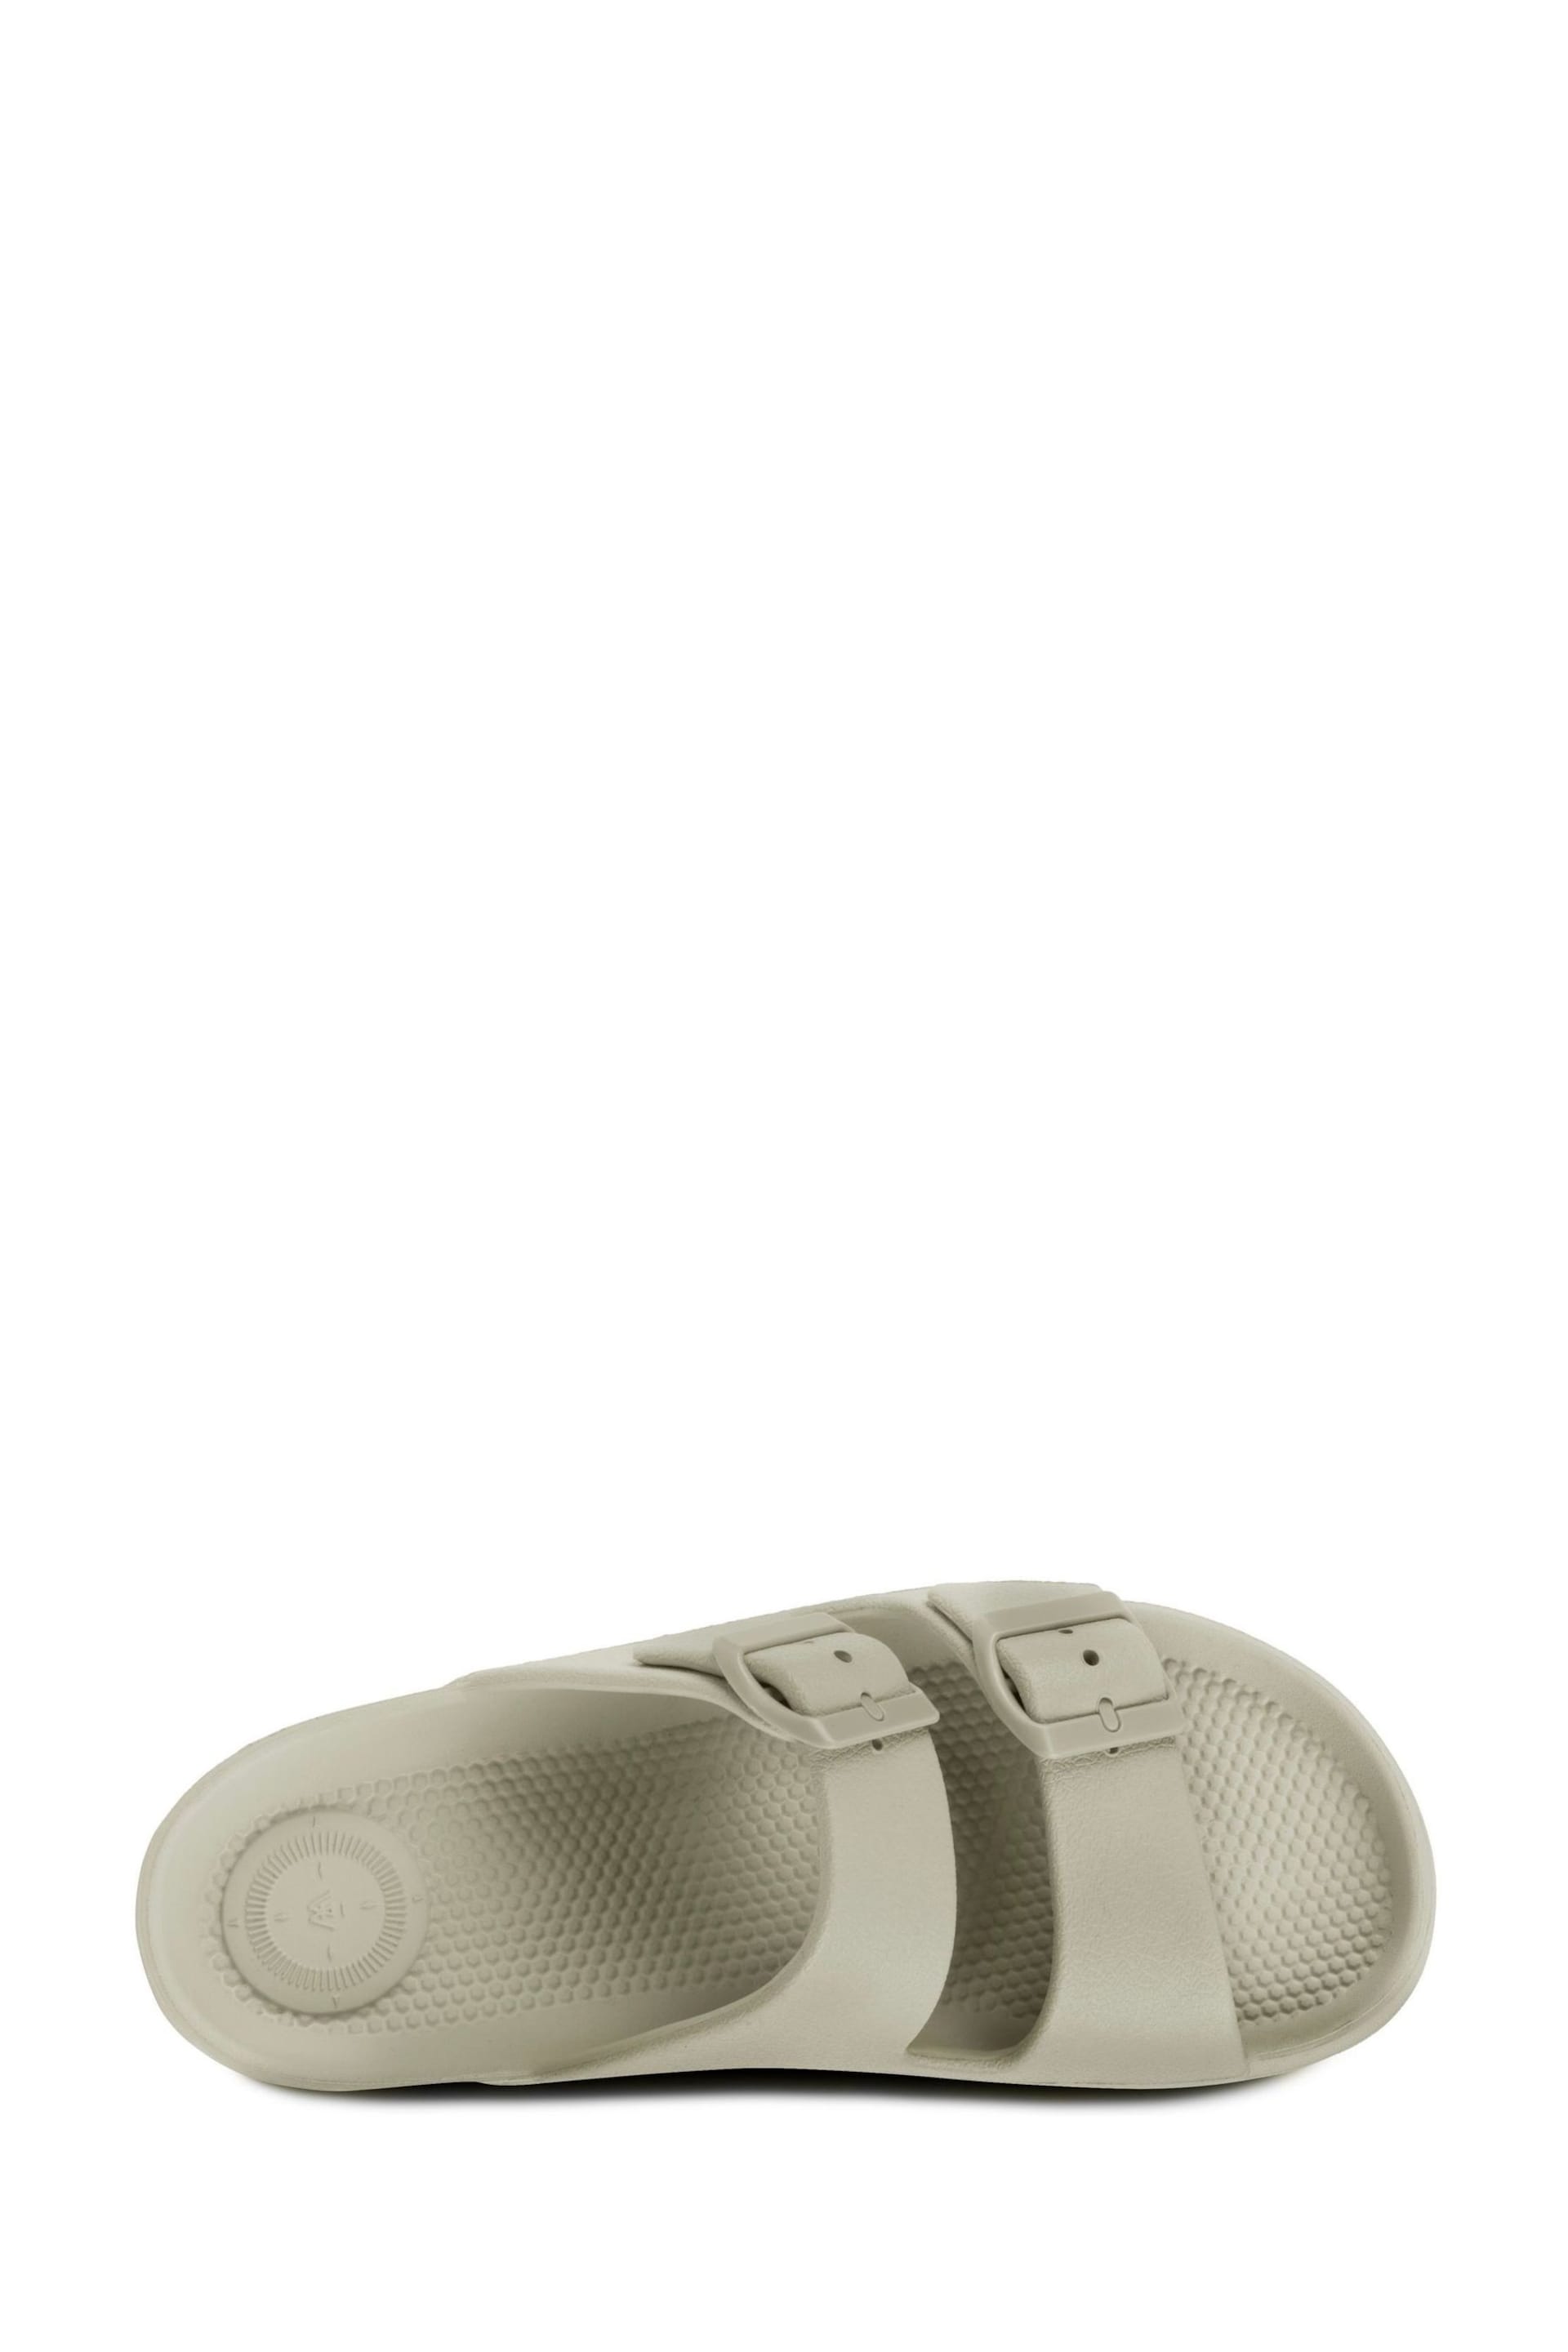 Totes Nude Solbounce Ladies Adjustable Double Buckle Slides - Image 4 of 5